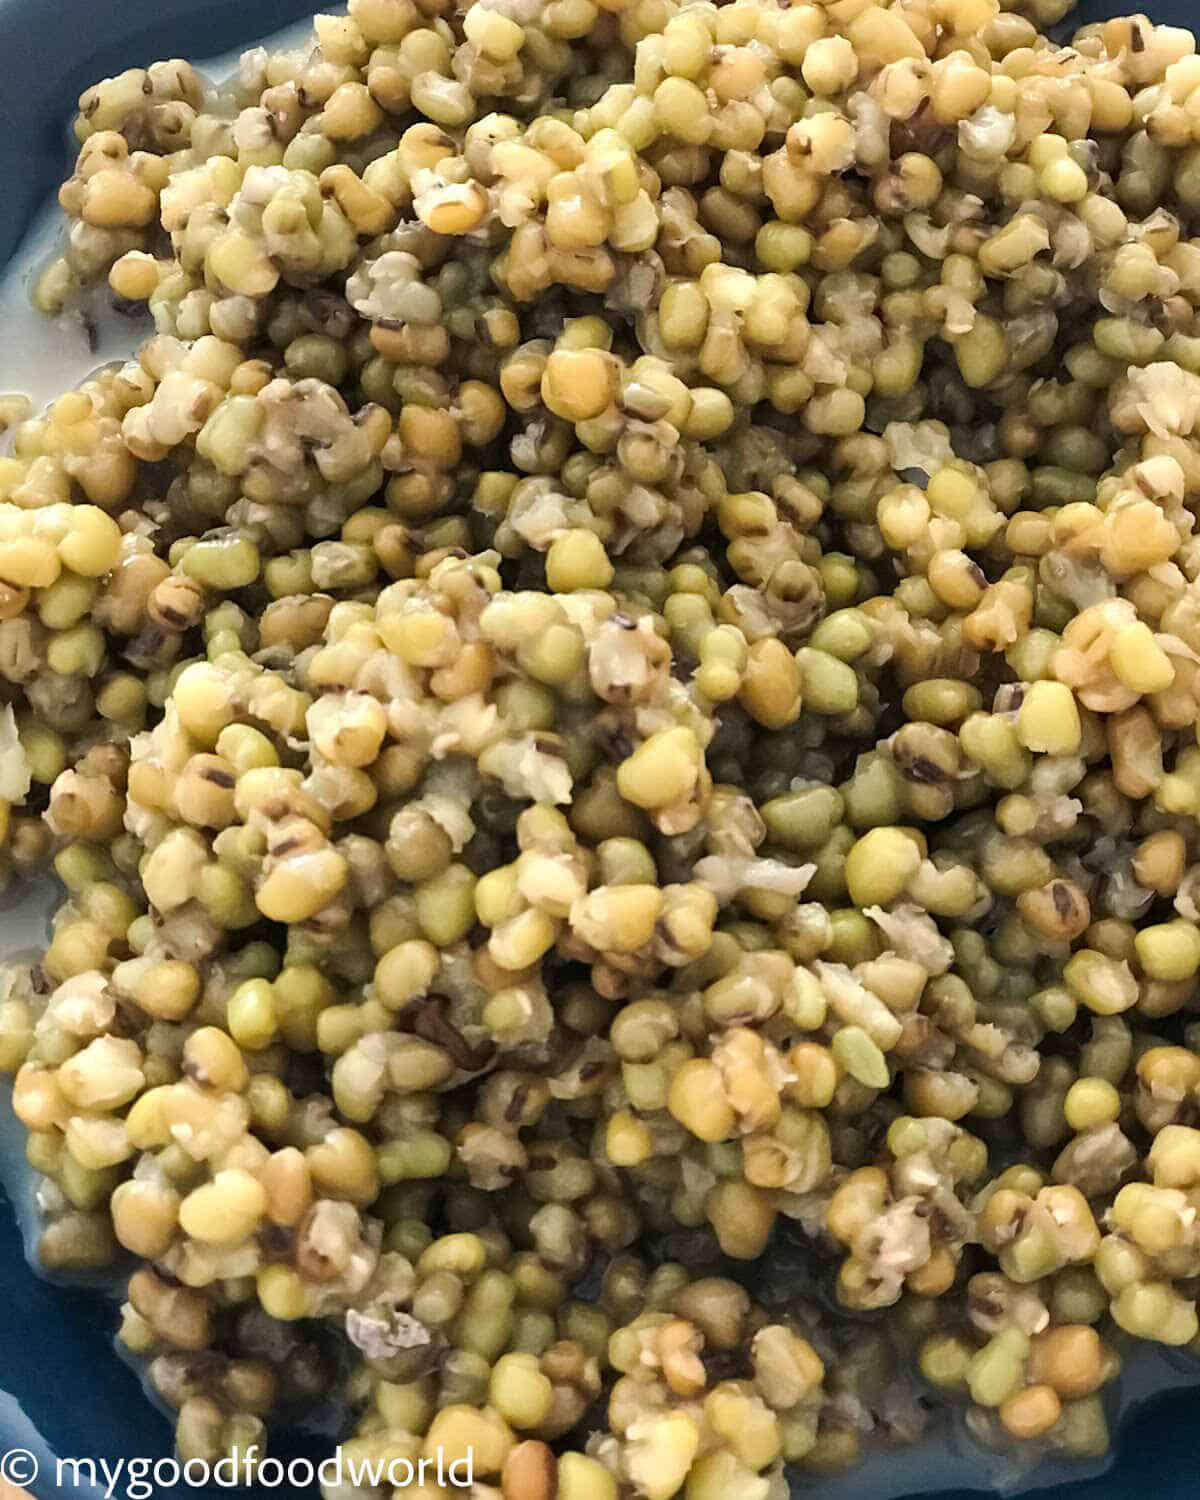 Cooked green moong dal placed in a bowl.